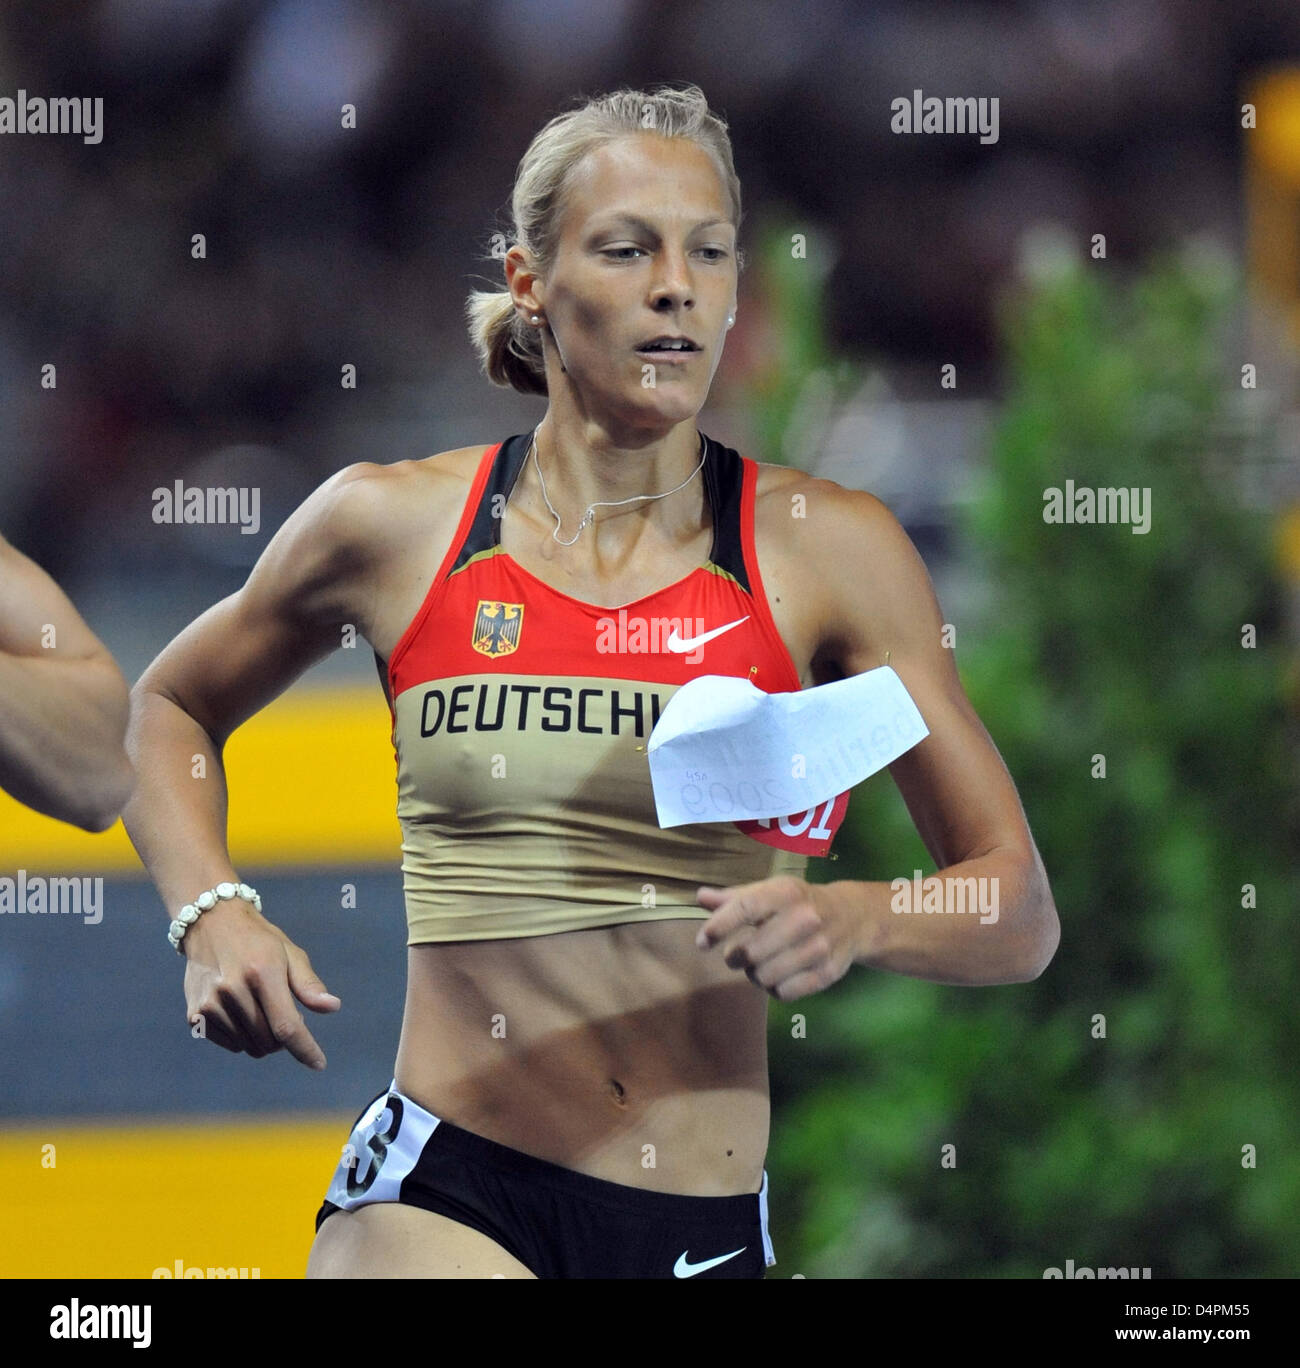 German Jennifer Oeser shown in action during the final 800m competition of the heptathlon at the 12th IAAF World Championships in Athletics in Berlin, Germany, 16 August 2009. Oeser won the silver medal. Photo: BERND THISSEN Stock Photo